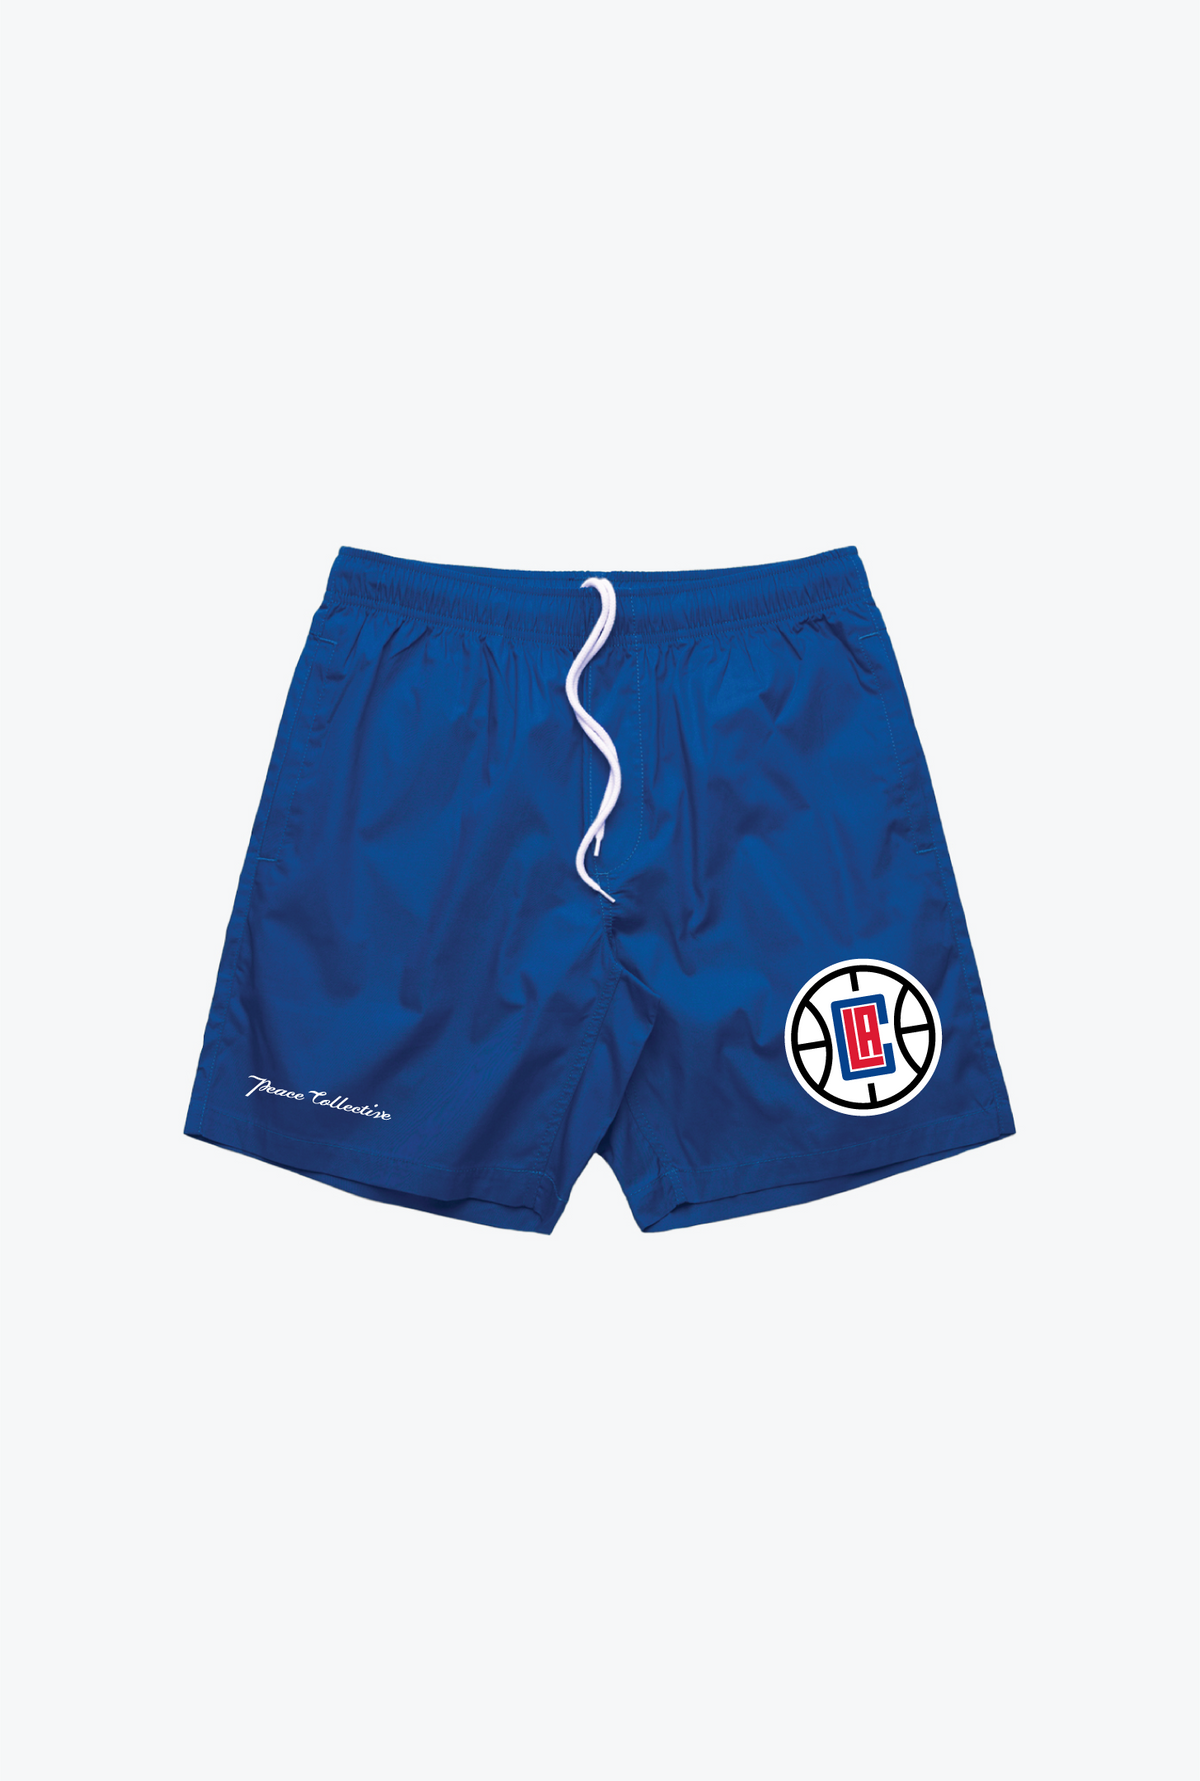 Los Angeles Clippers Board Shorts - Blue